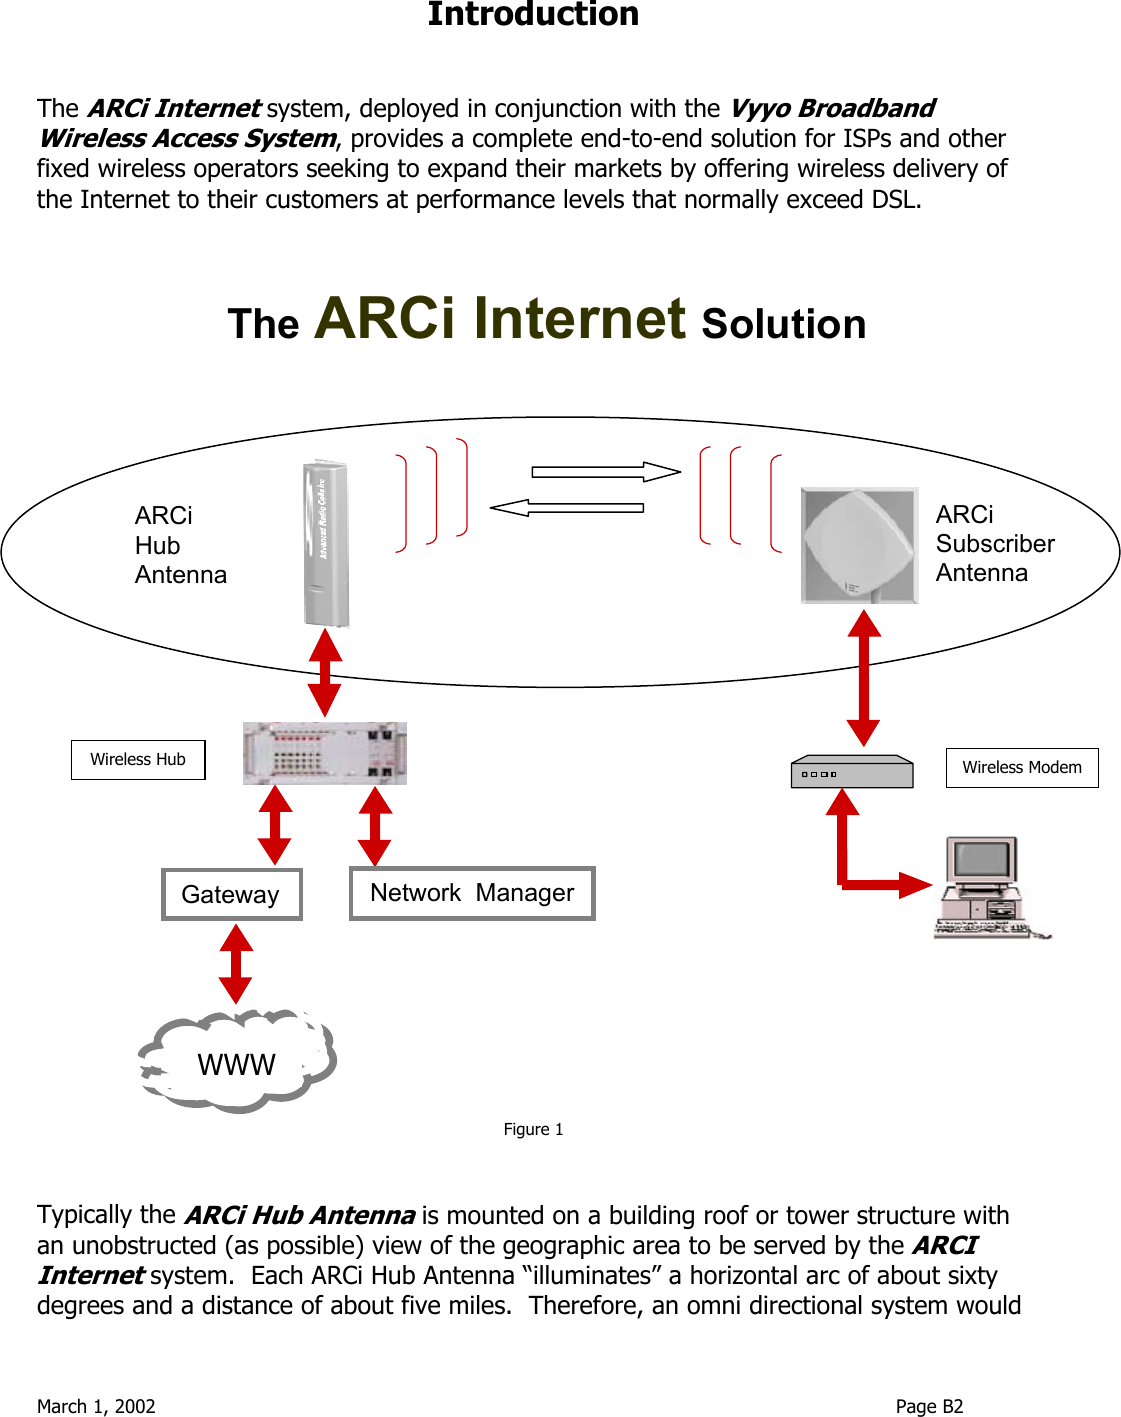  March 1, 2002                                                                                                                              Page B2  Introduction   The ARCi Internet system, deployed in conjunction with the Vyyo Broadband Wireless Access System, provides a complete end-to-end solution for ISPs and other fixed wireless operators seeking to expand their markets by offering wireless delivery of the Internet to their customers at performance levels that normally exceed DSL.                               Figure 1   Typically the ARCi Hub Antenna is mounted on a building roof or tower structure with an unobstructed (as possible) view of the geographic area to be served by the ARCI Internet system.  Each ARCi Hub Antenna “illuminates” a horizontal arc of about sixty degrees and a distance of about five miles.  Therefore, an omni directional system would Hub Antenna Hub Cable Modem ARCi SubscriberAntenna WWWWireless ModemWireless Hub The ARCi Internet Solution ARCi Gateway  Network  Manager